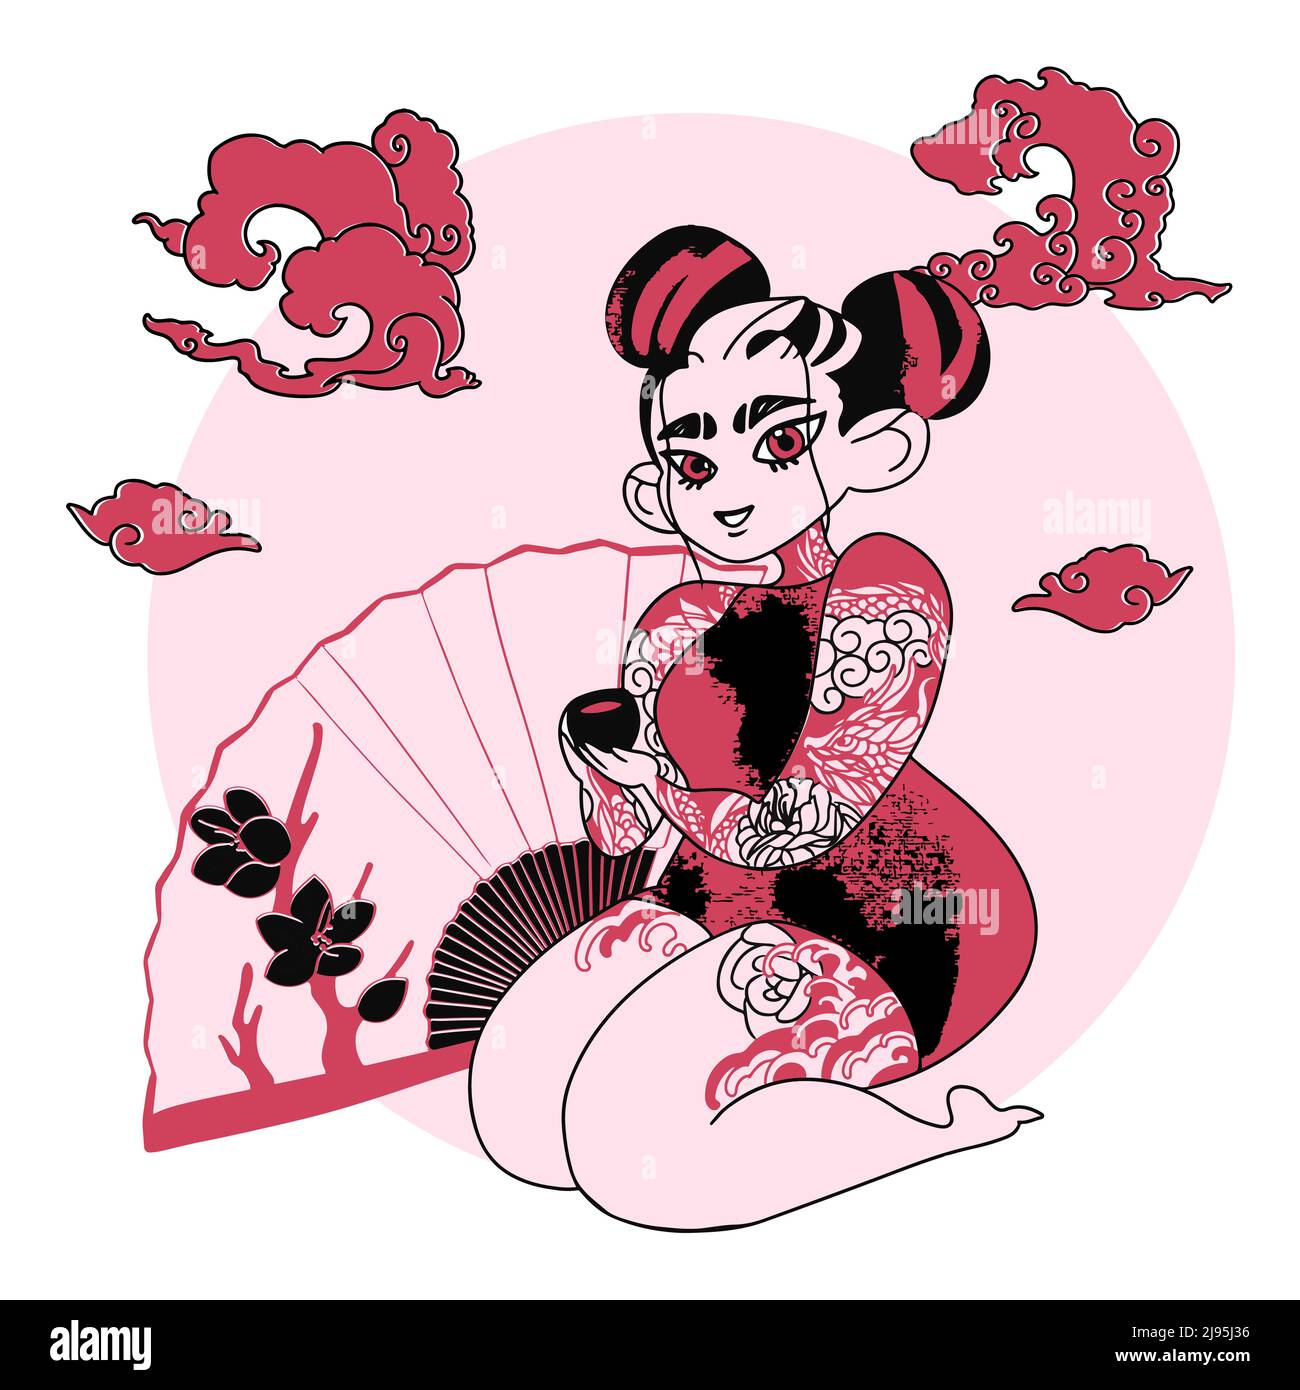 Japanese anime girl with doacon tattoo. Geisha illustration with japanese style drawing Stock Vector